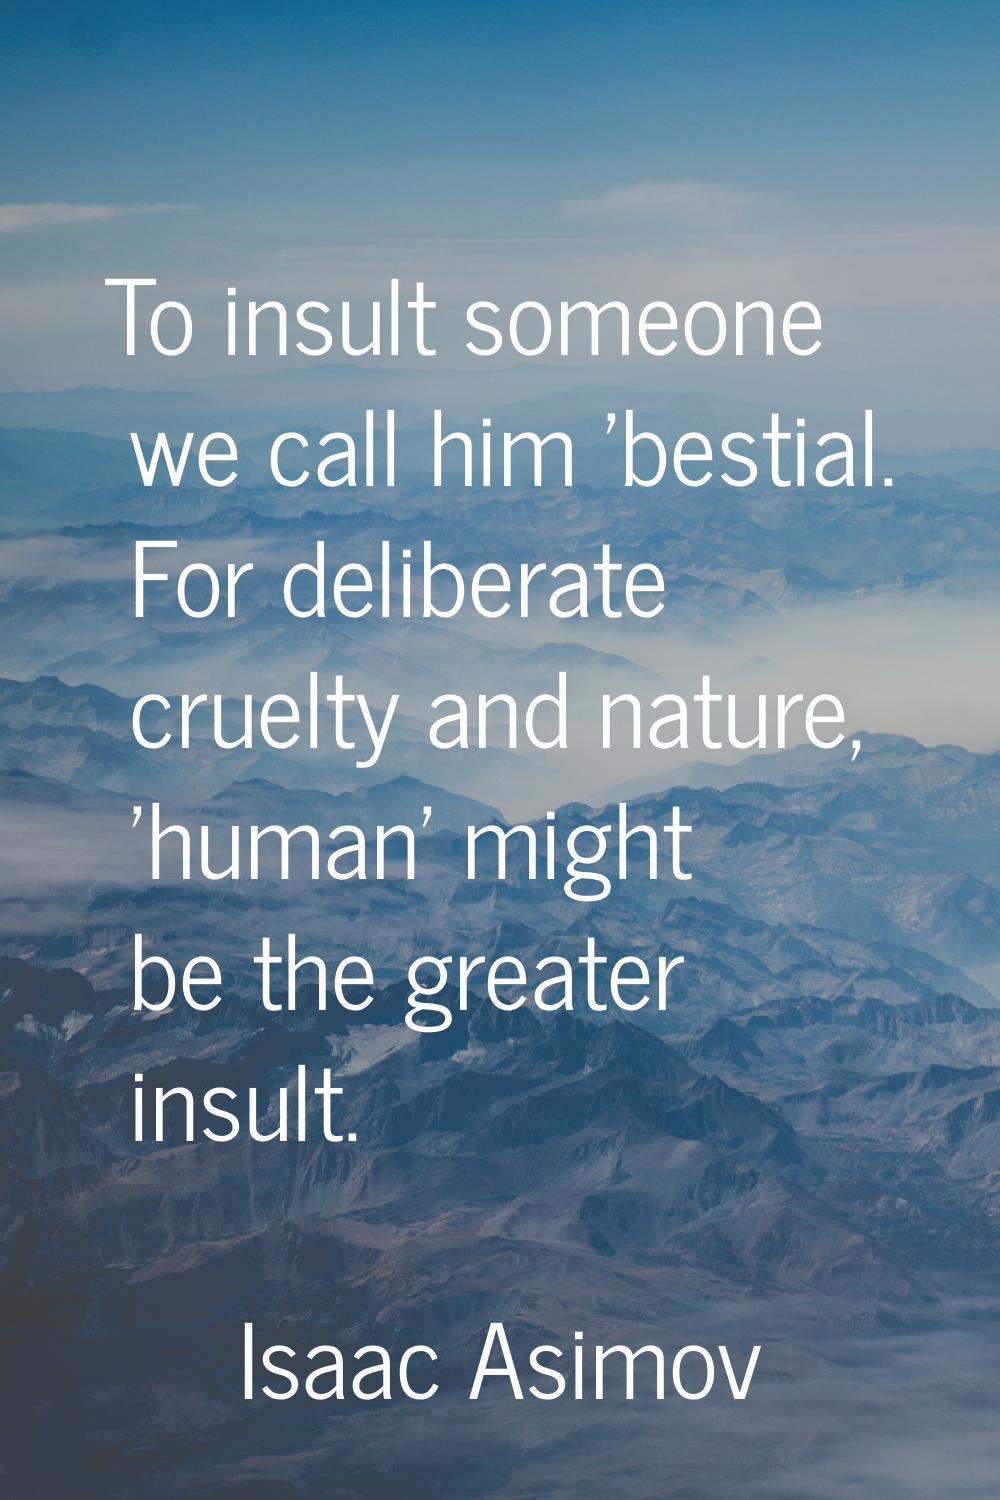 To insult someone we call him 'bestial. For deliberate cruelty and nature, 'human' might be the gre